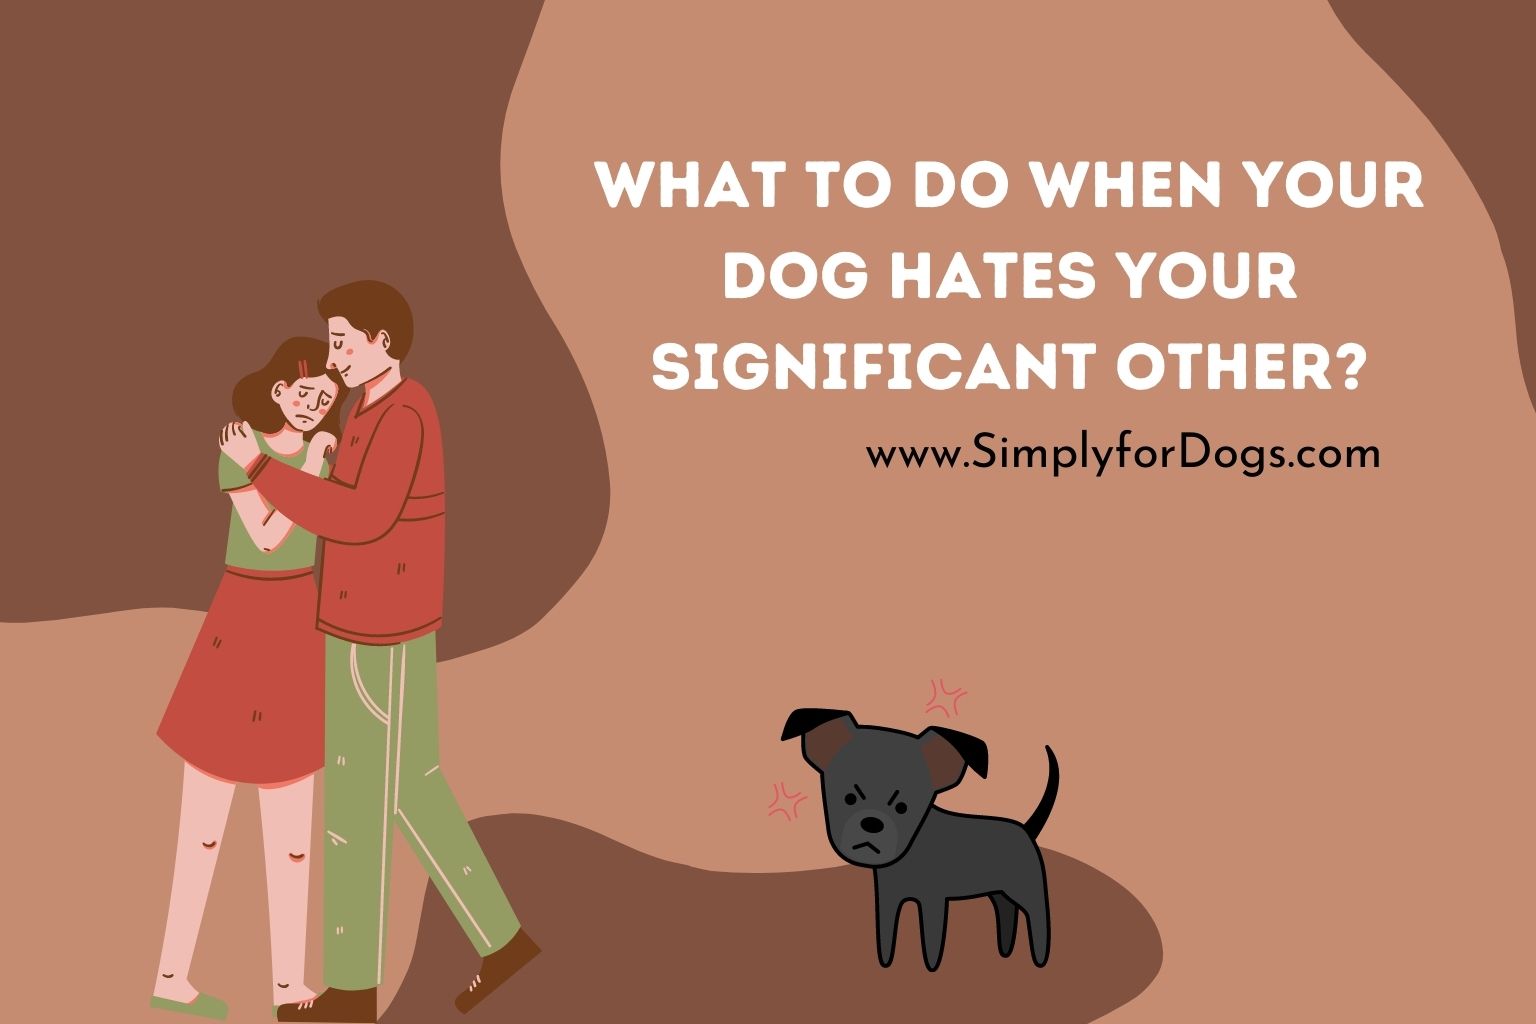 What To Do When Your Dog Hates Your Significant Other